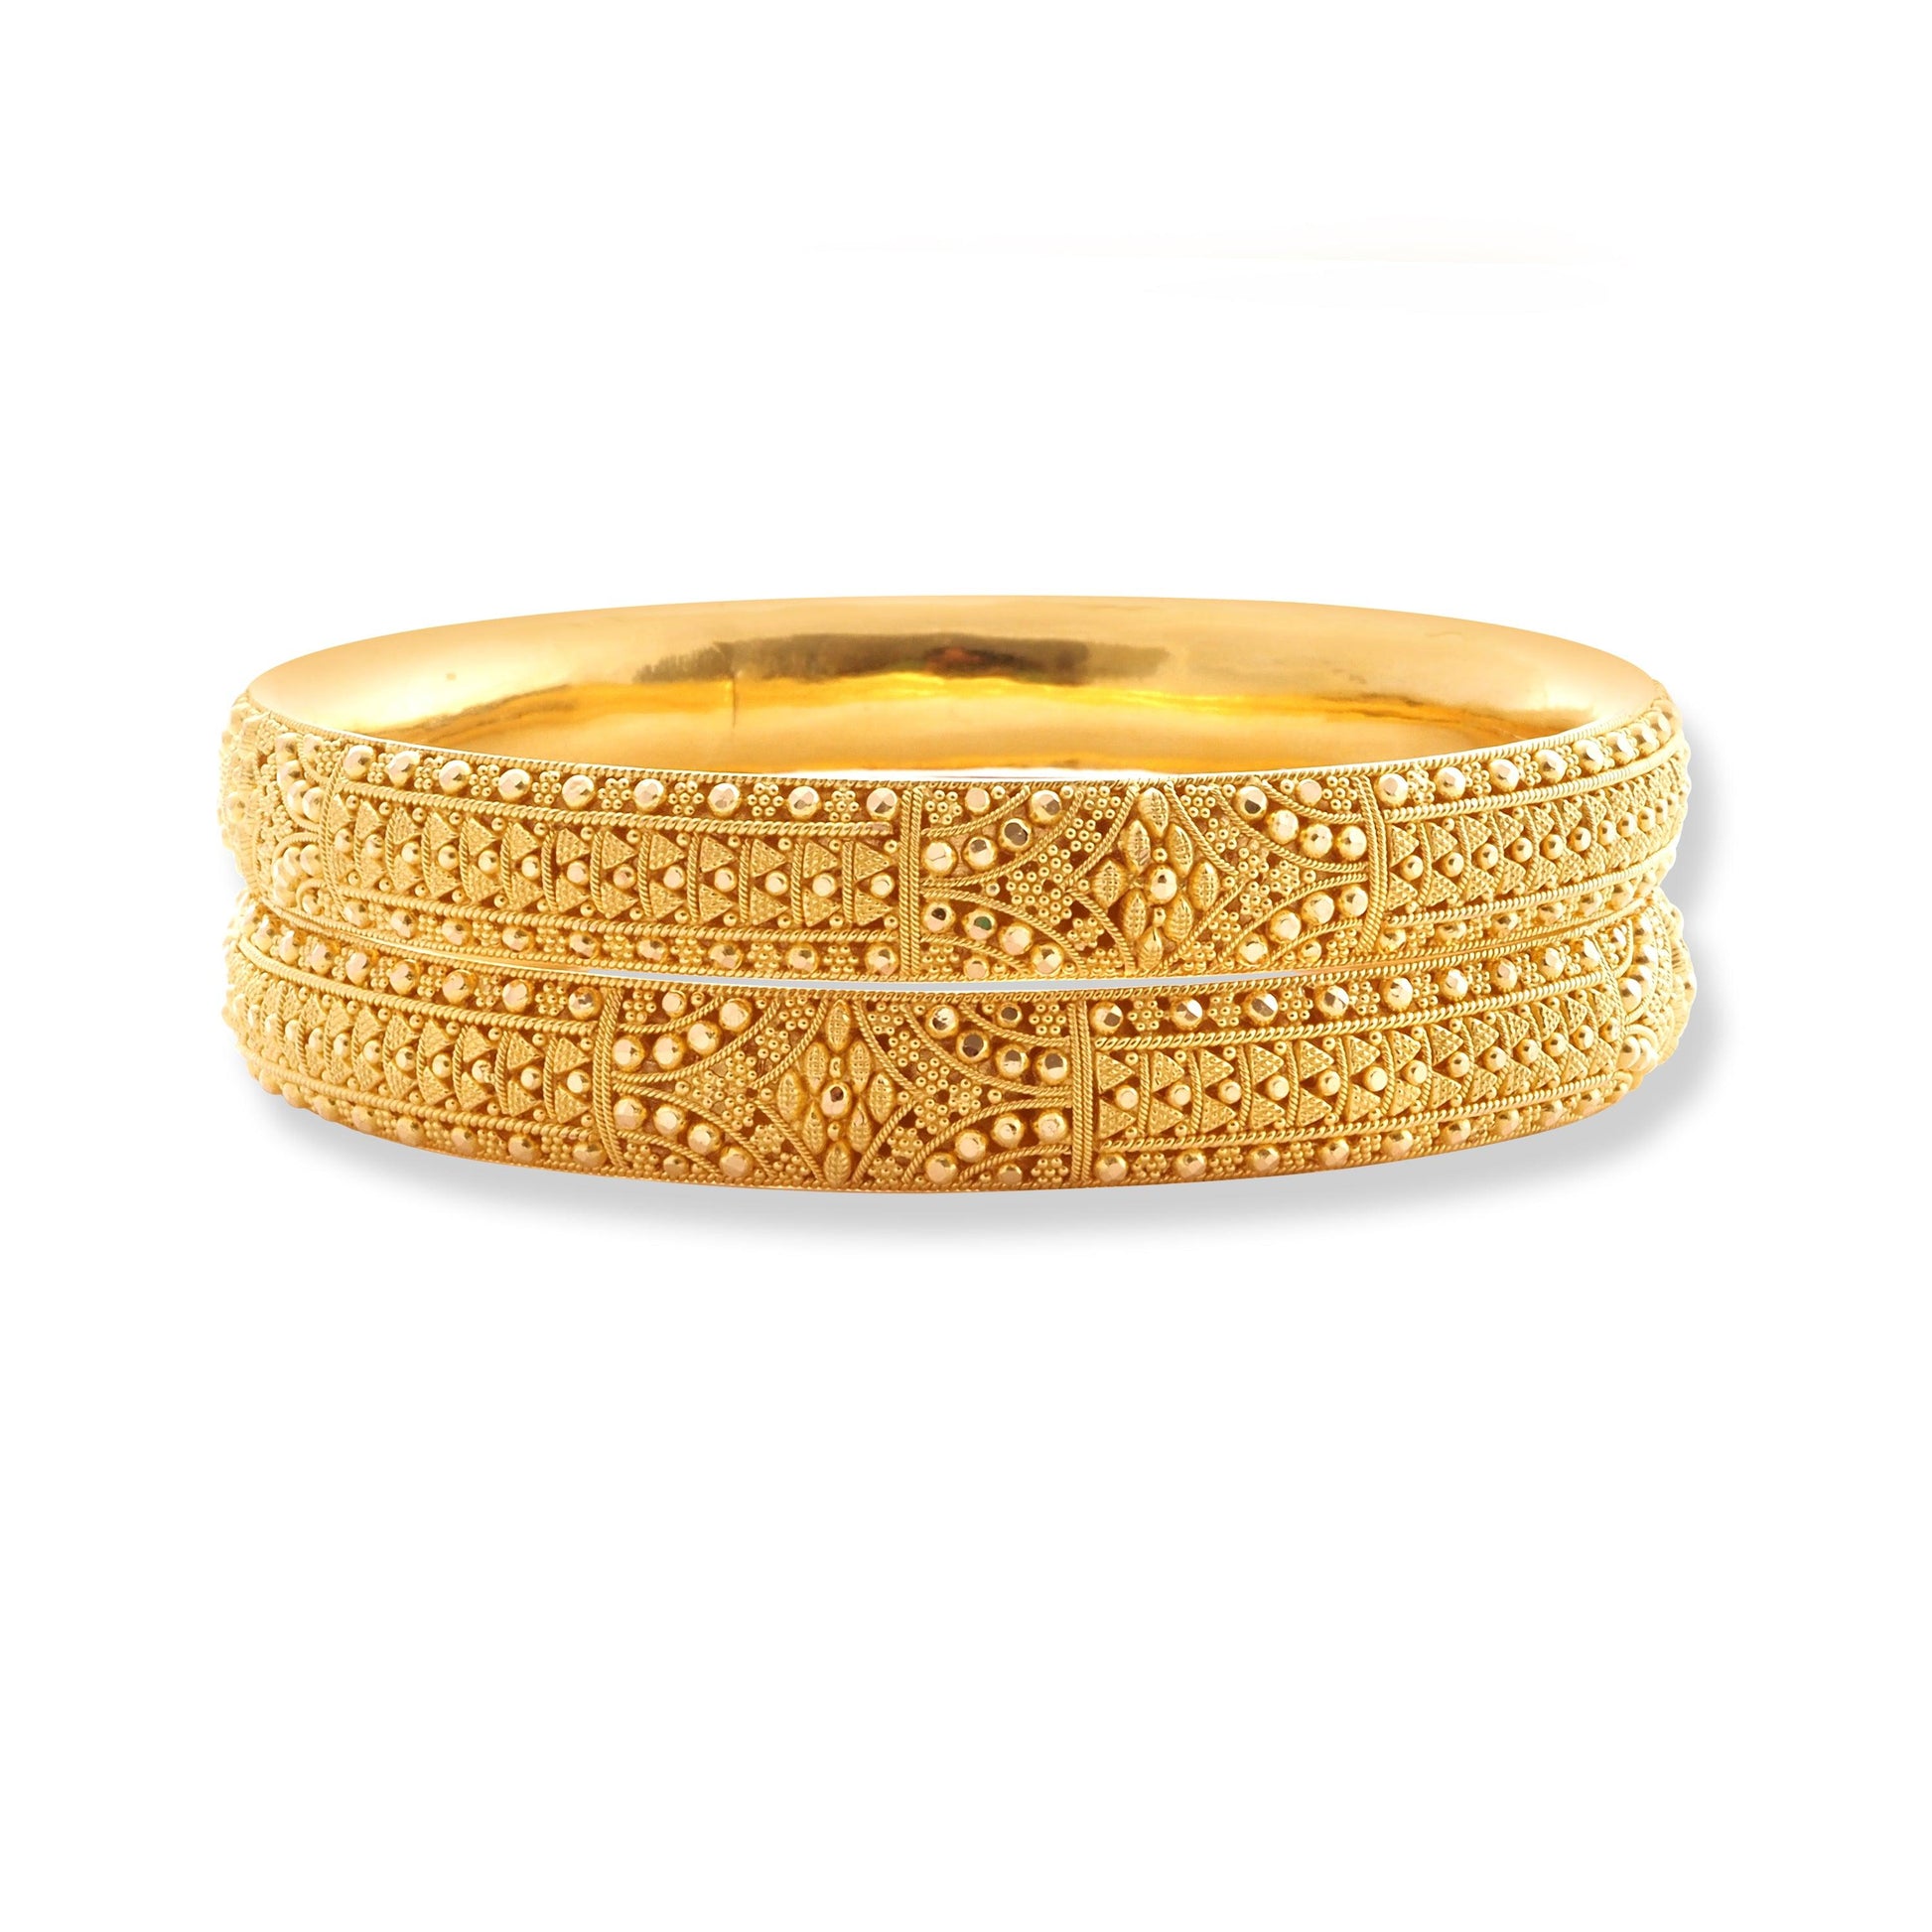 22ct Gold Pair of Bangles with Filigree Work & Comfort fit Finish B-8582 - Minar Jewellers